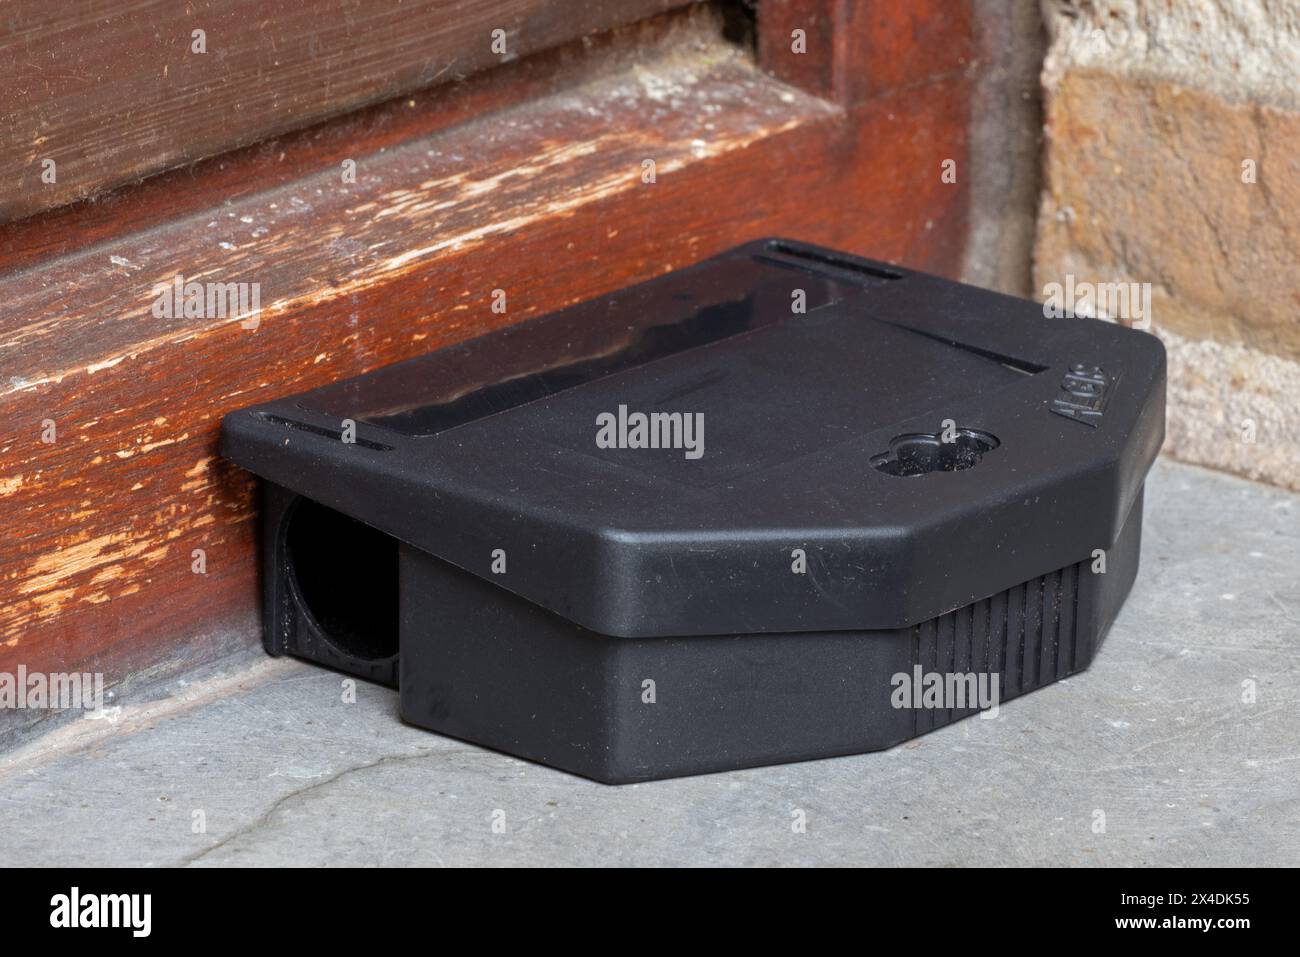 Poisoned plastic box for pest control, mouse bait station filled with rodenticide, poisonous paste as poison to exterminate mice in and around house Stock Photo